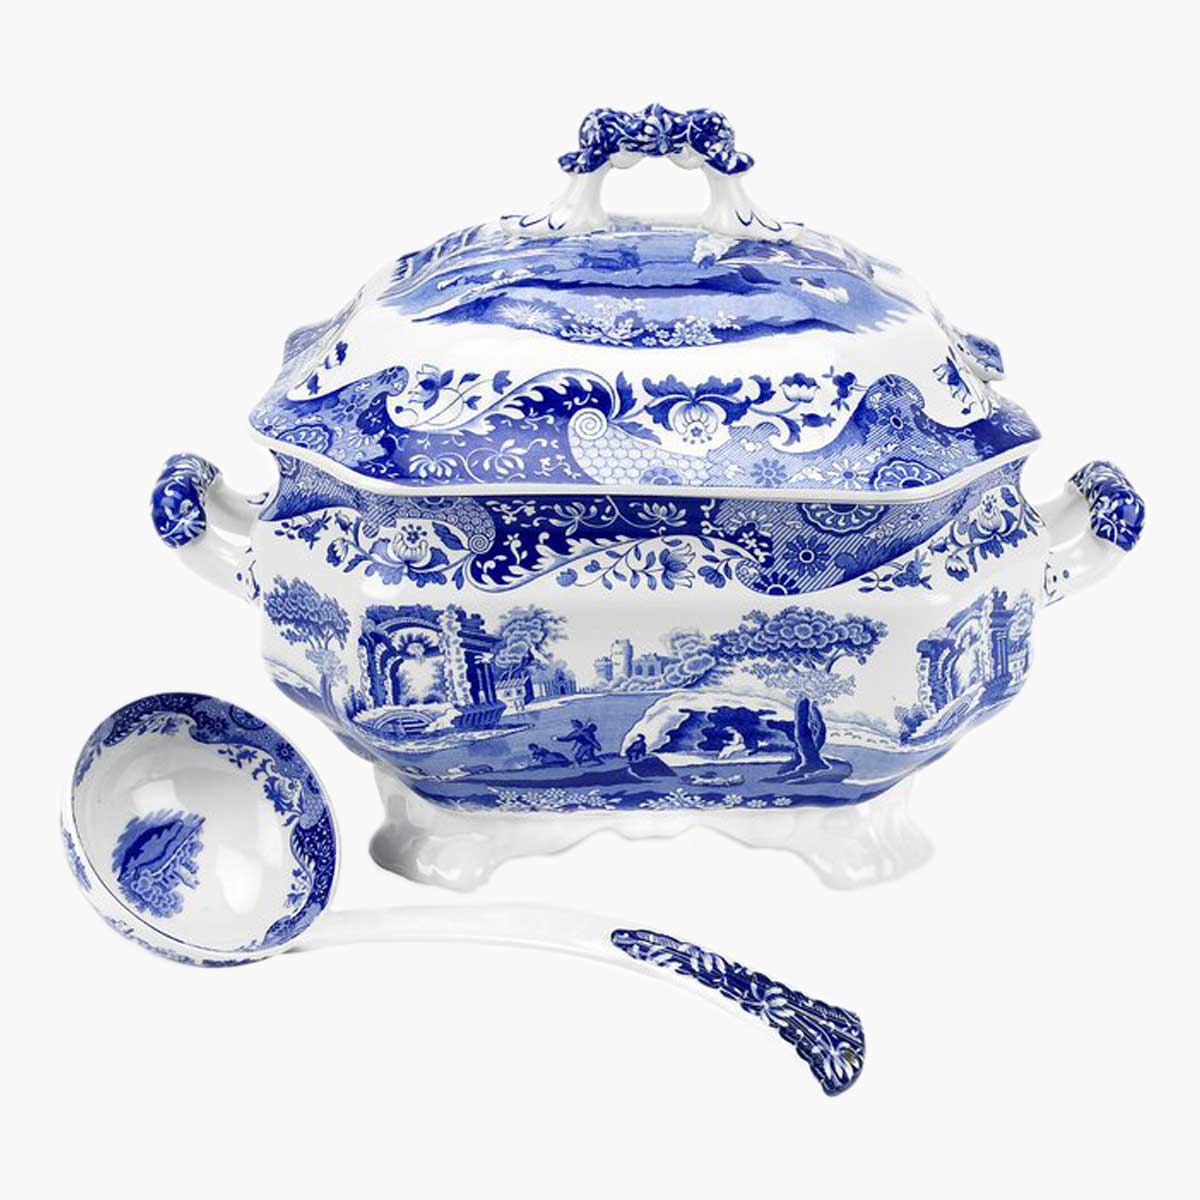 A decorative blue and white soup tureen, bowl, and ladle.